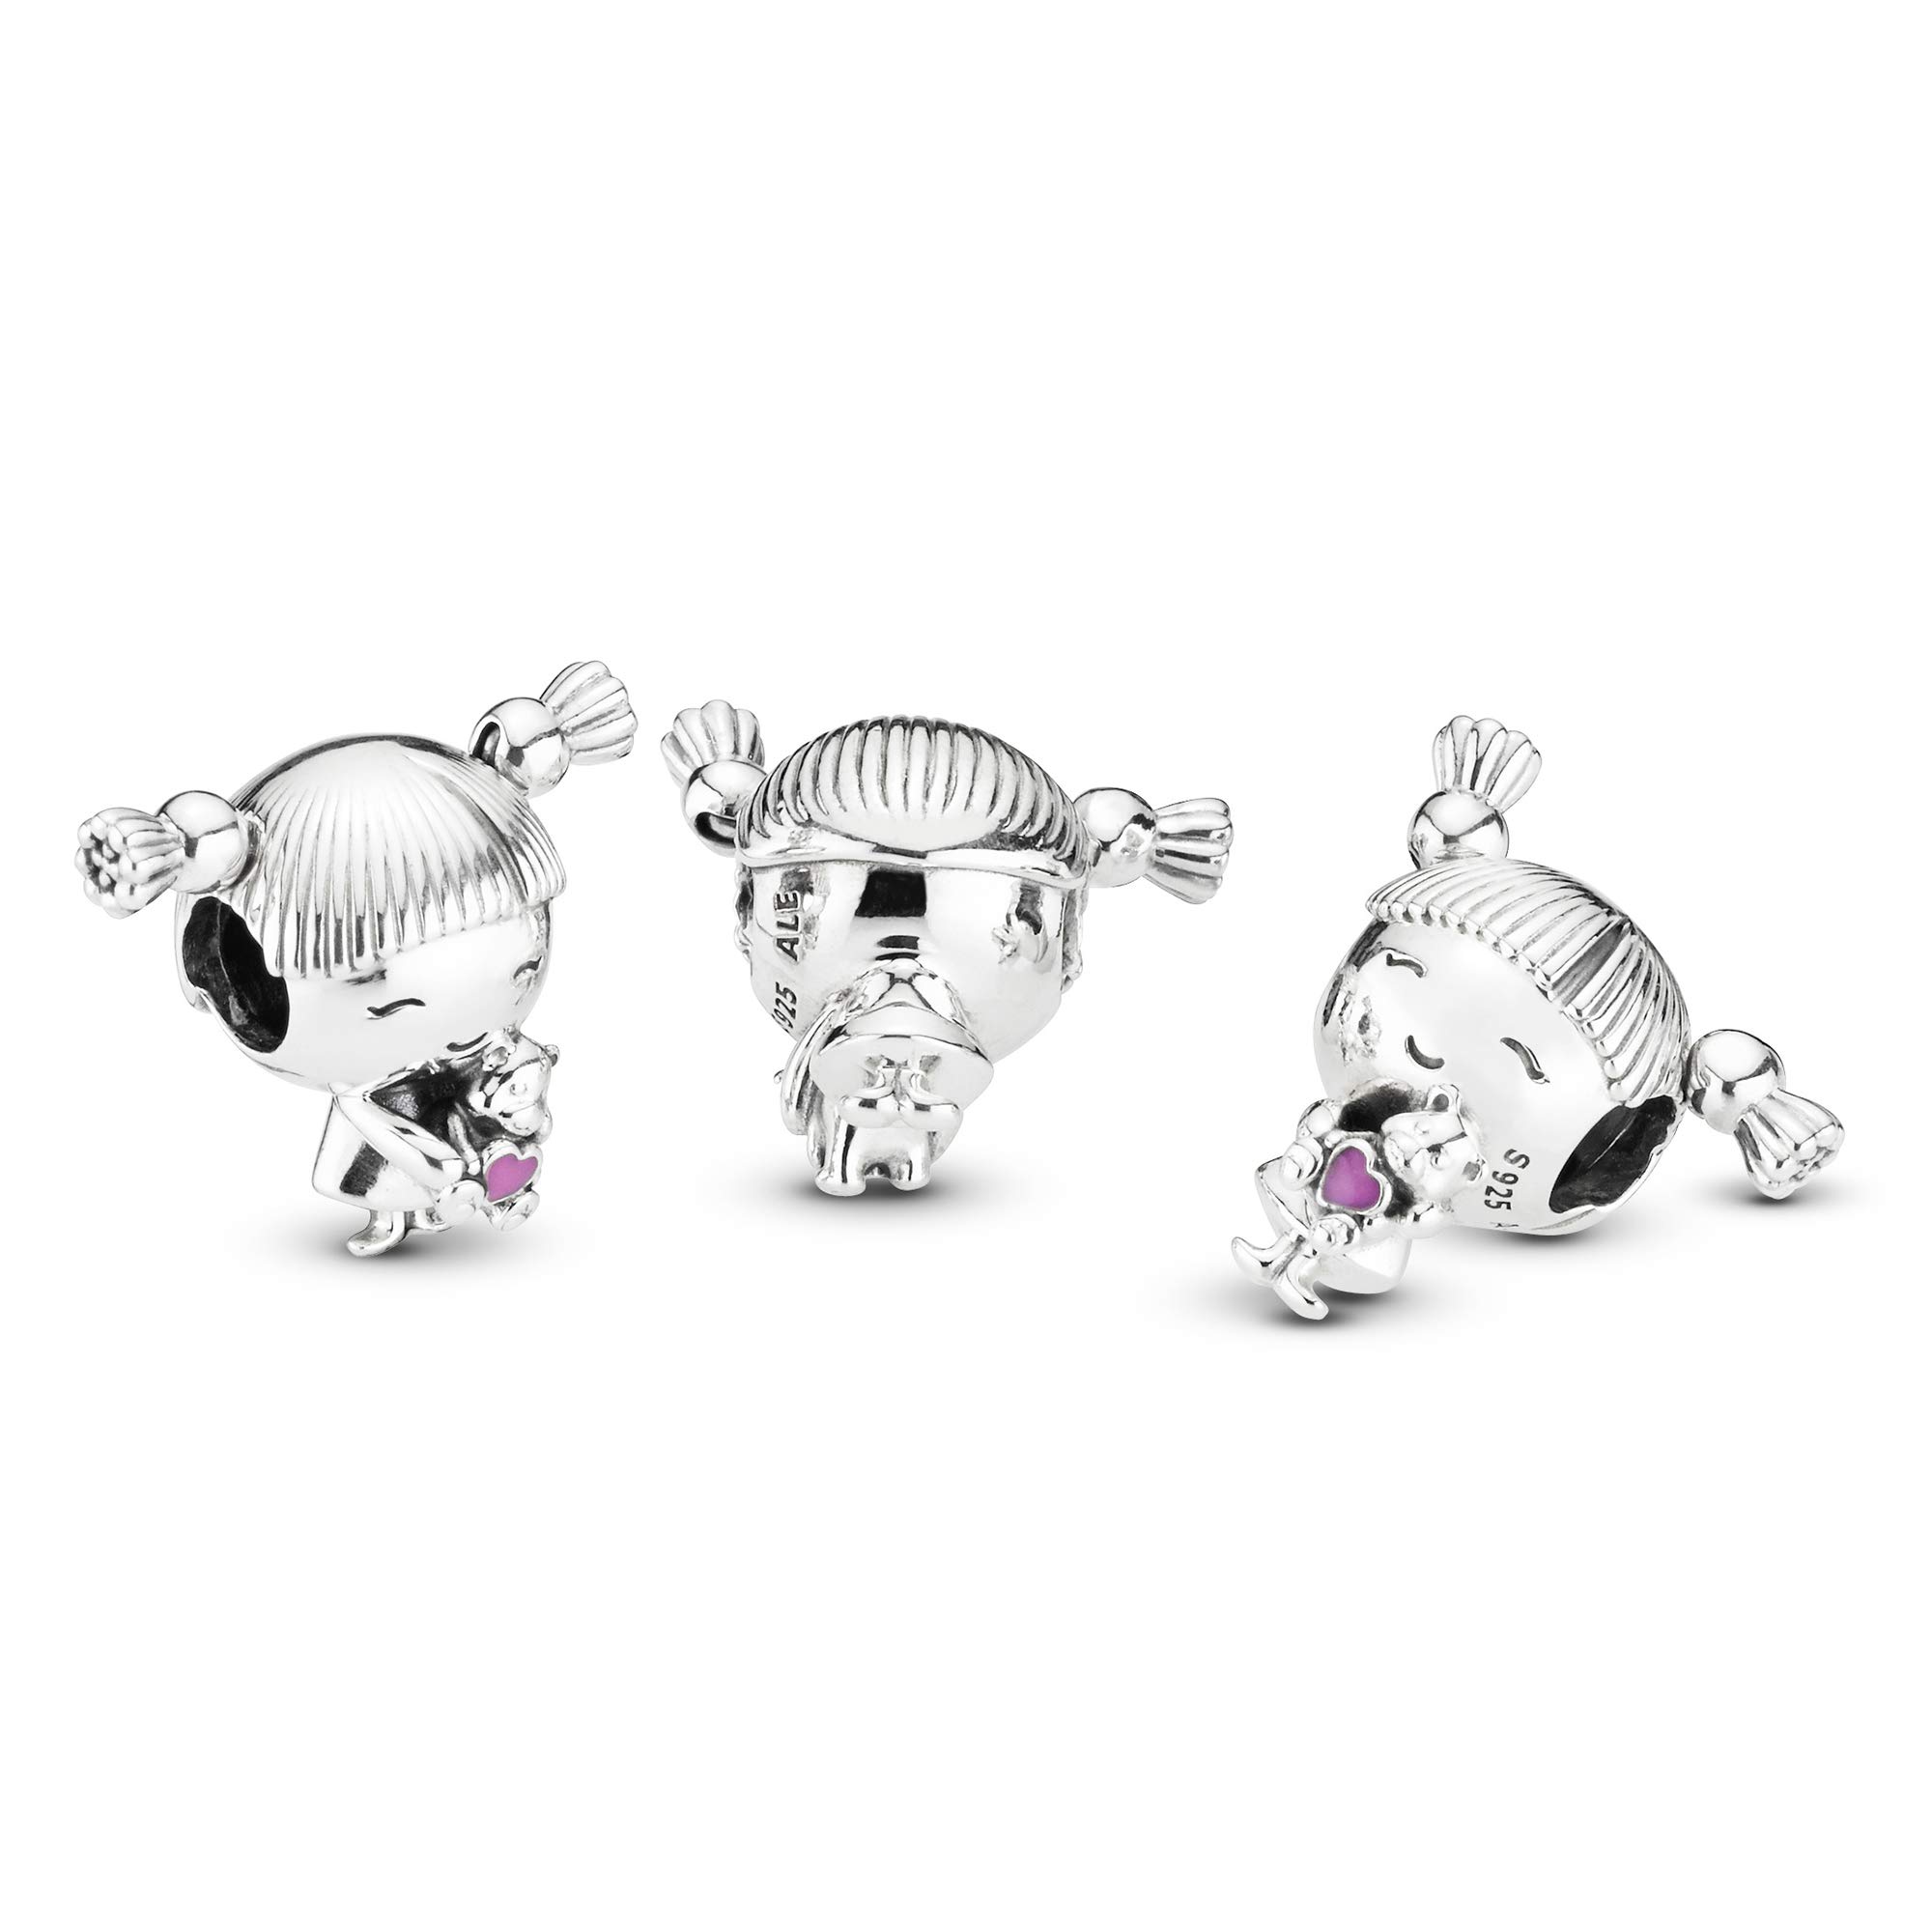 Pandora Little Girl Charm - Compatible Moments Bracelets - Jewelry for Women - Gift for Women in Your Life - Made with Sterling Silver & Enamel, With Gift Box